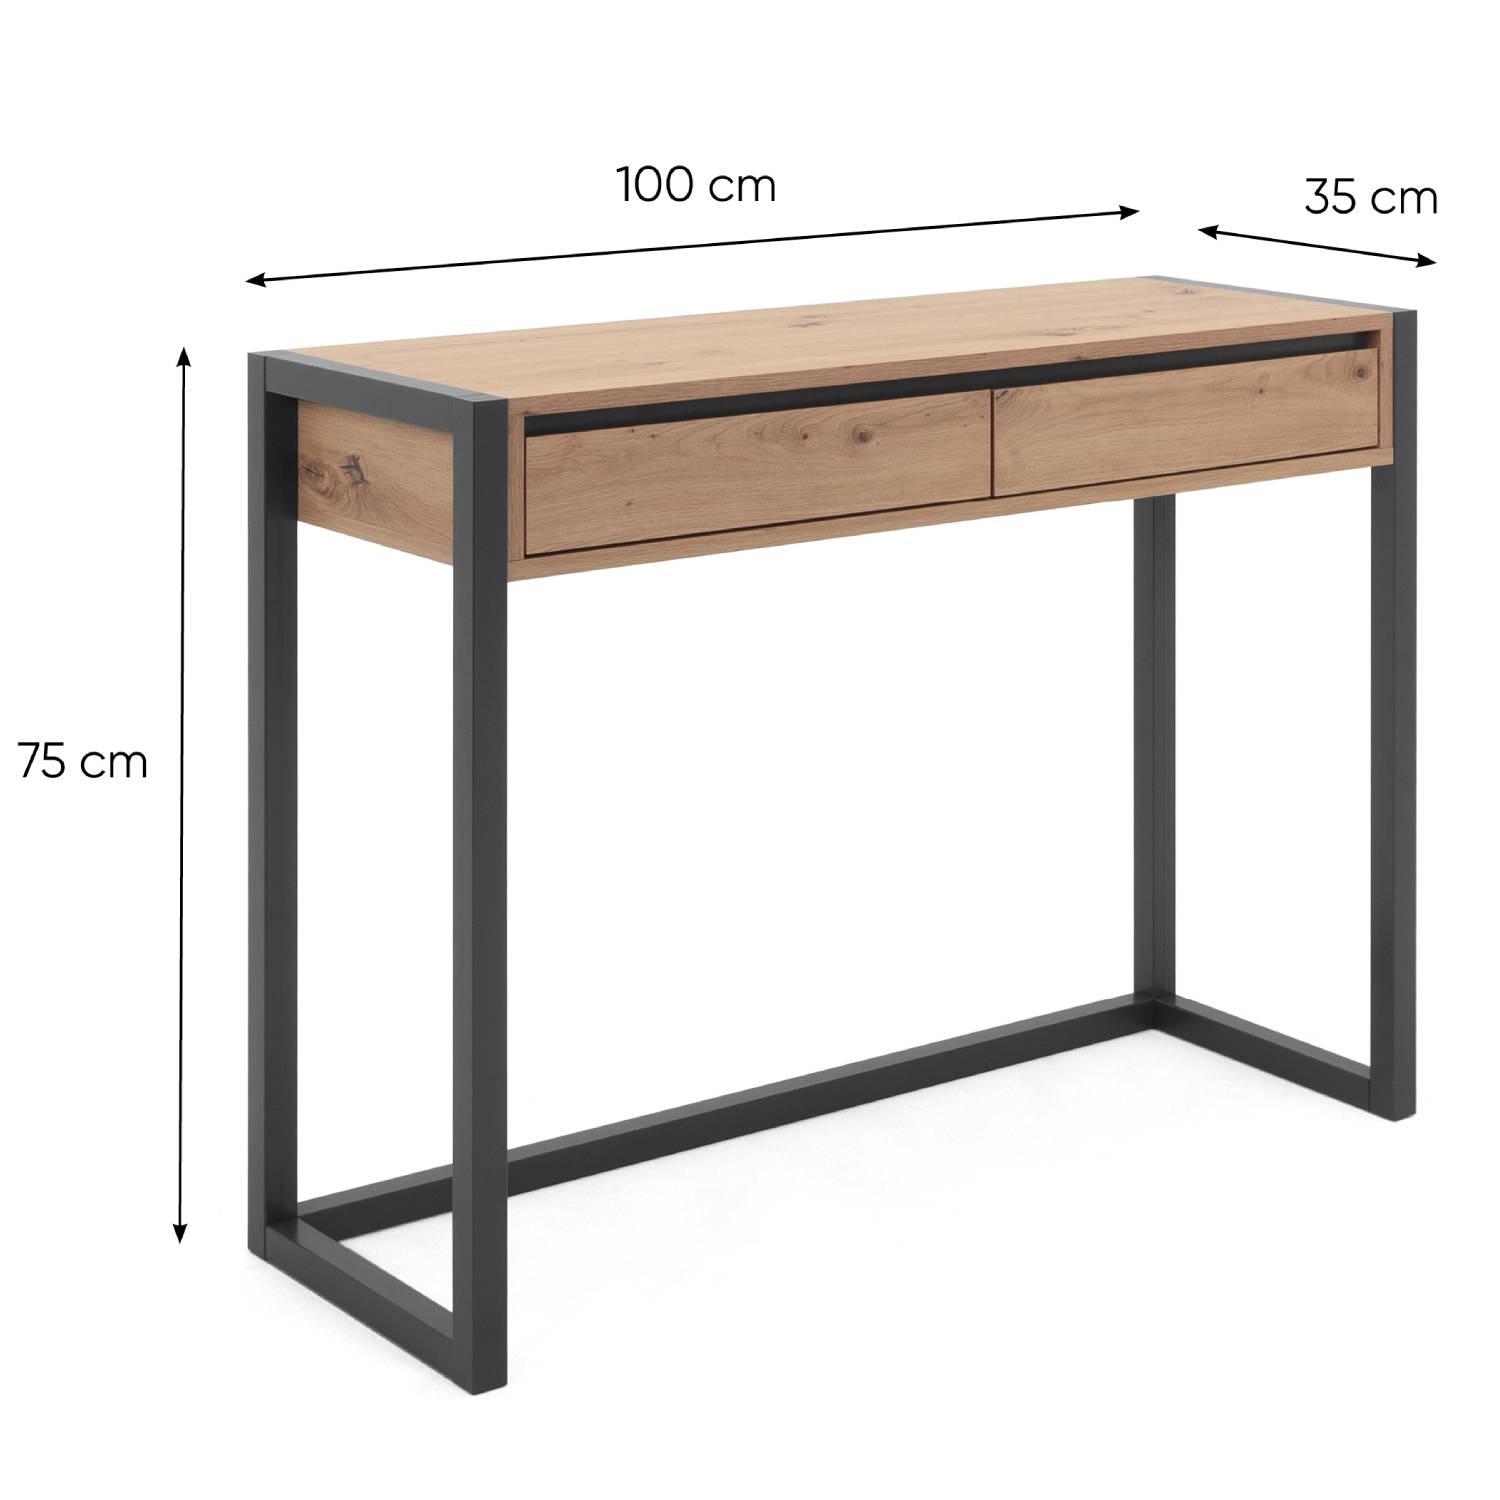 Console Table with 2 Drawers Hallway Furniture Desk Wood Industrial Style Storage